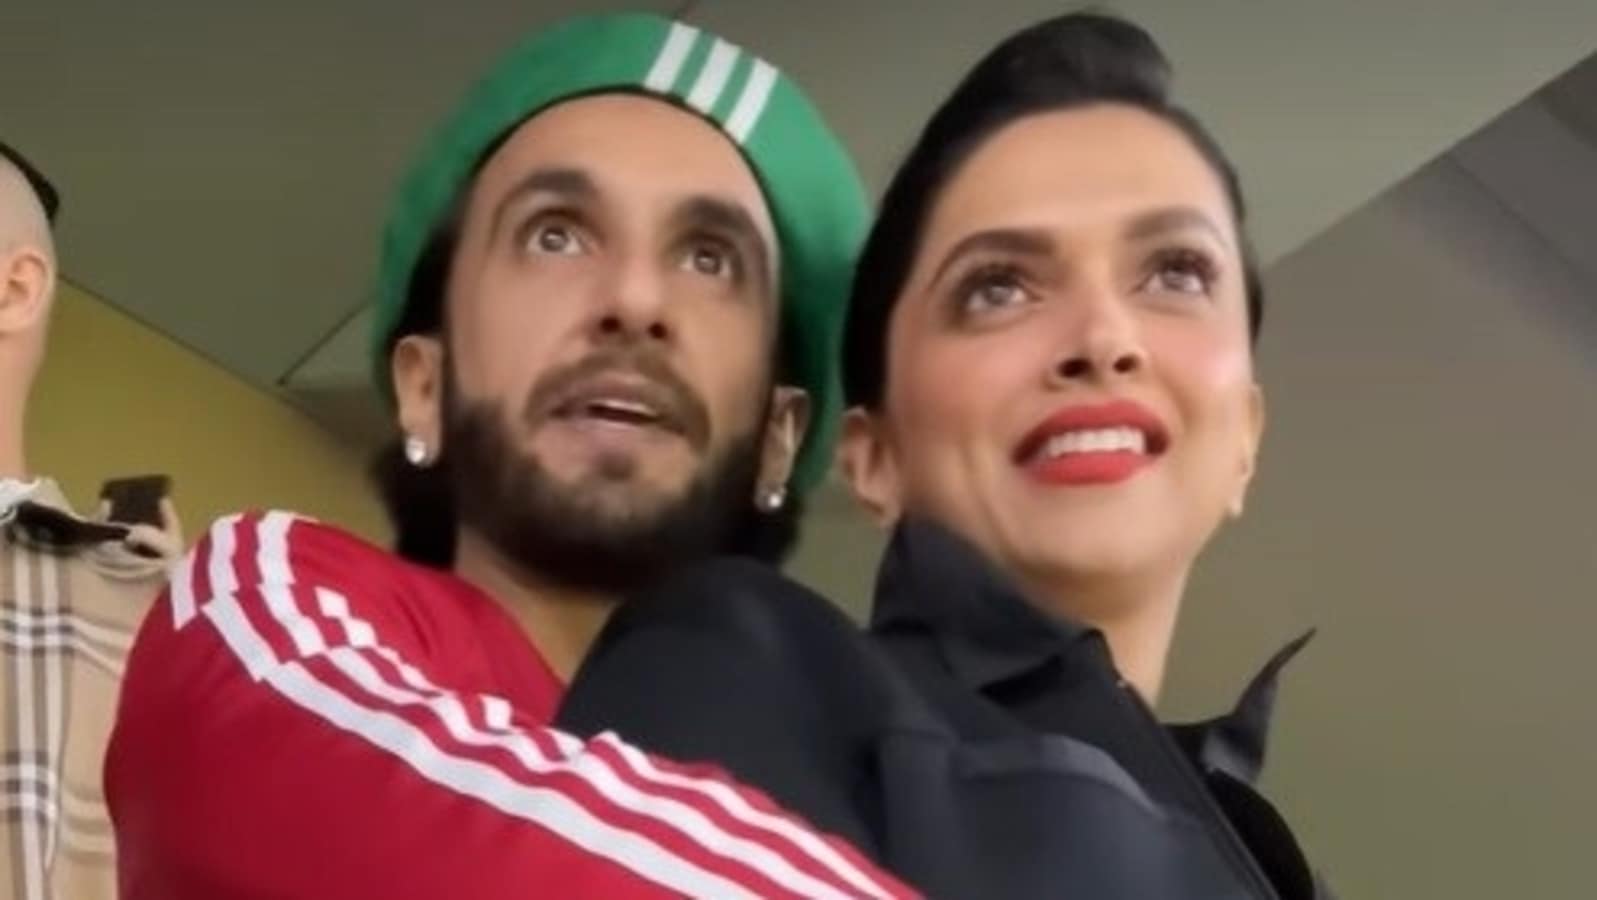 Proud moment': Ranveer Singh opens up about Deepika Padukone unveiling FIFA  World Cup 2022 trophy - Entertainment News